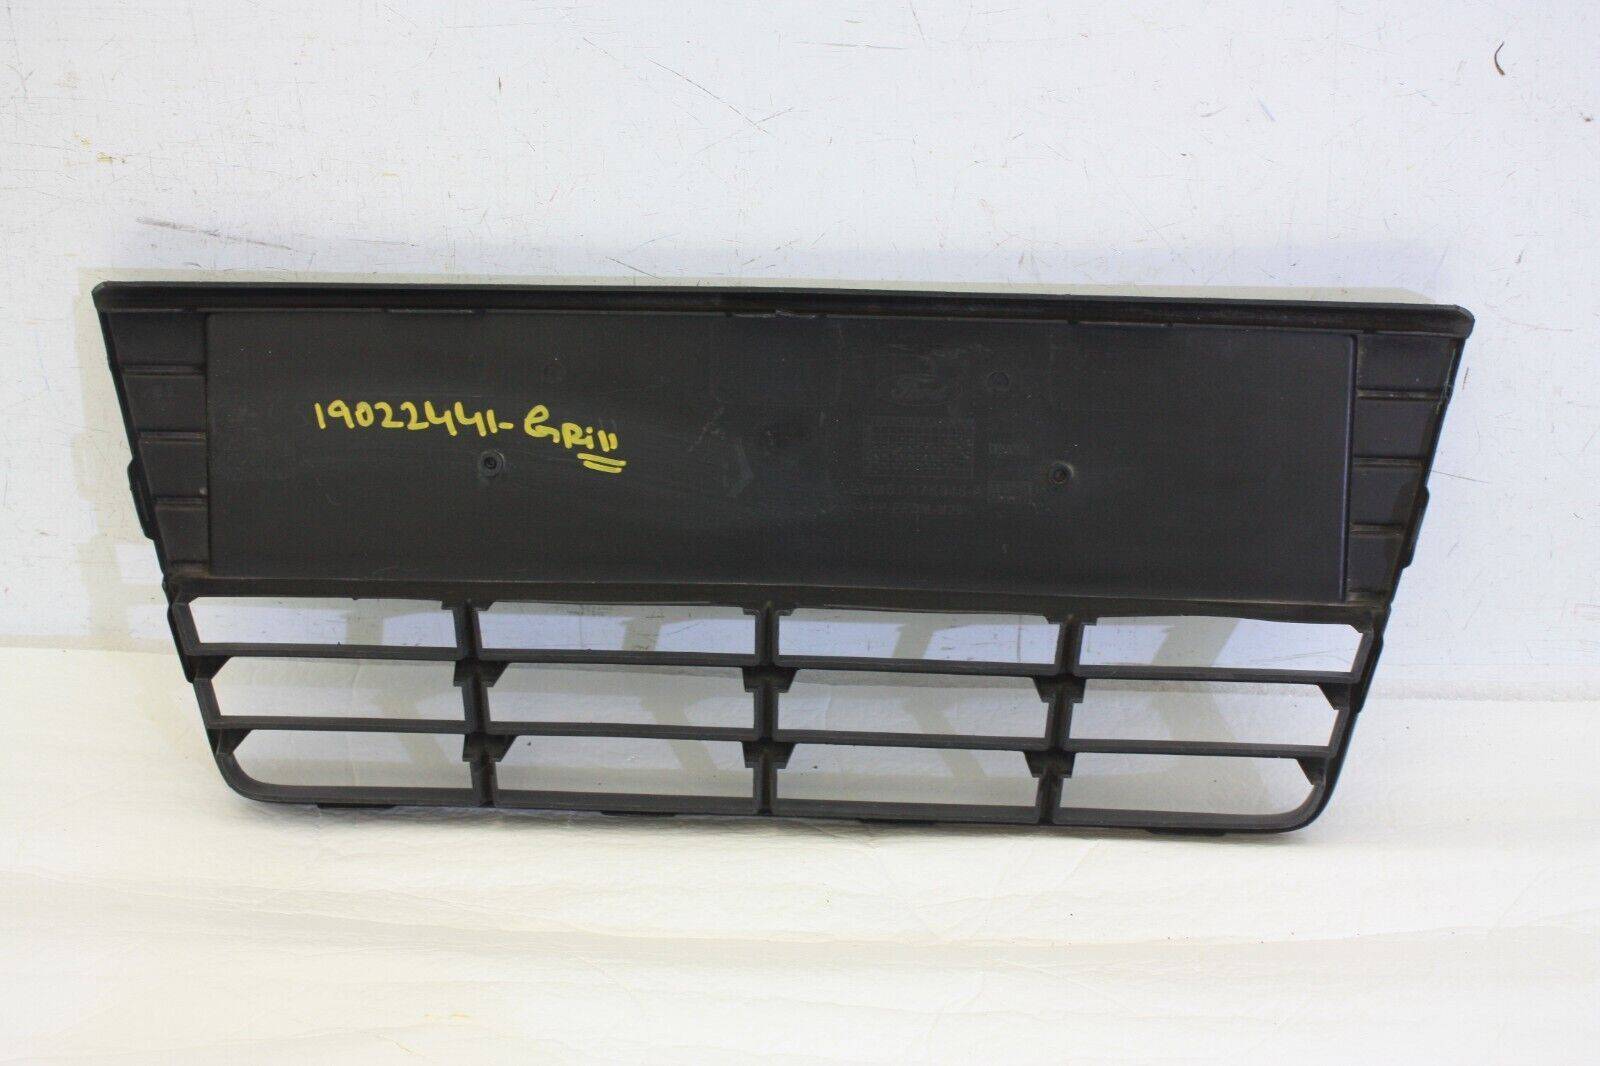 Ford-Focus-Front-Bumper-Grill-2011-TO-2014-BM51-17K945-A-Genuine-176247746081-10